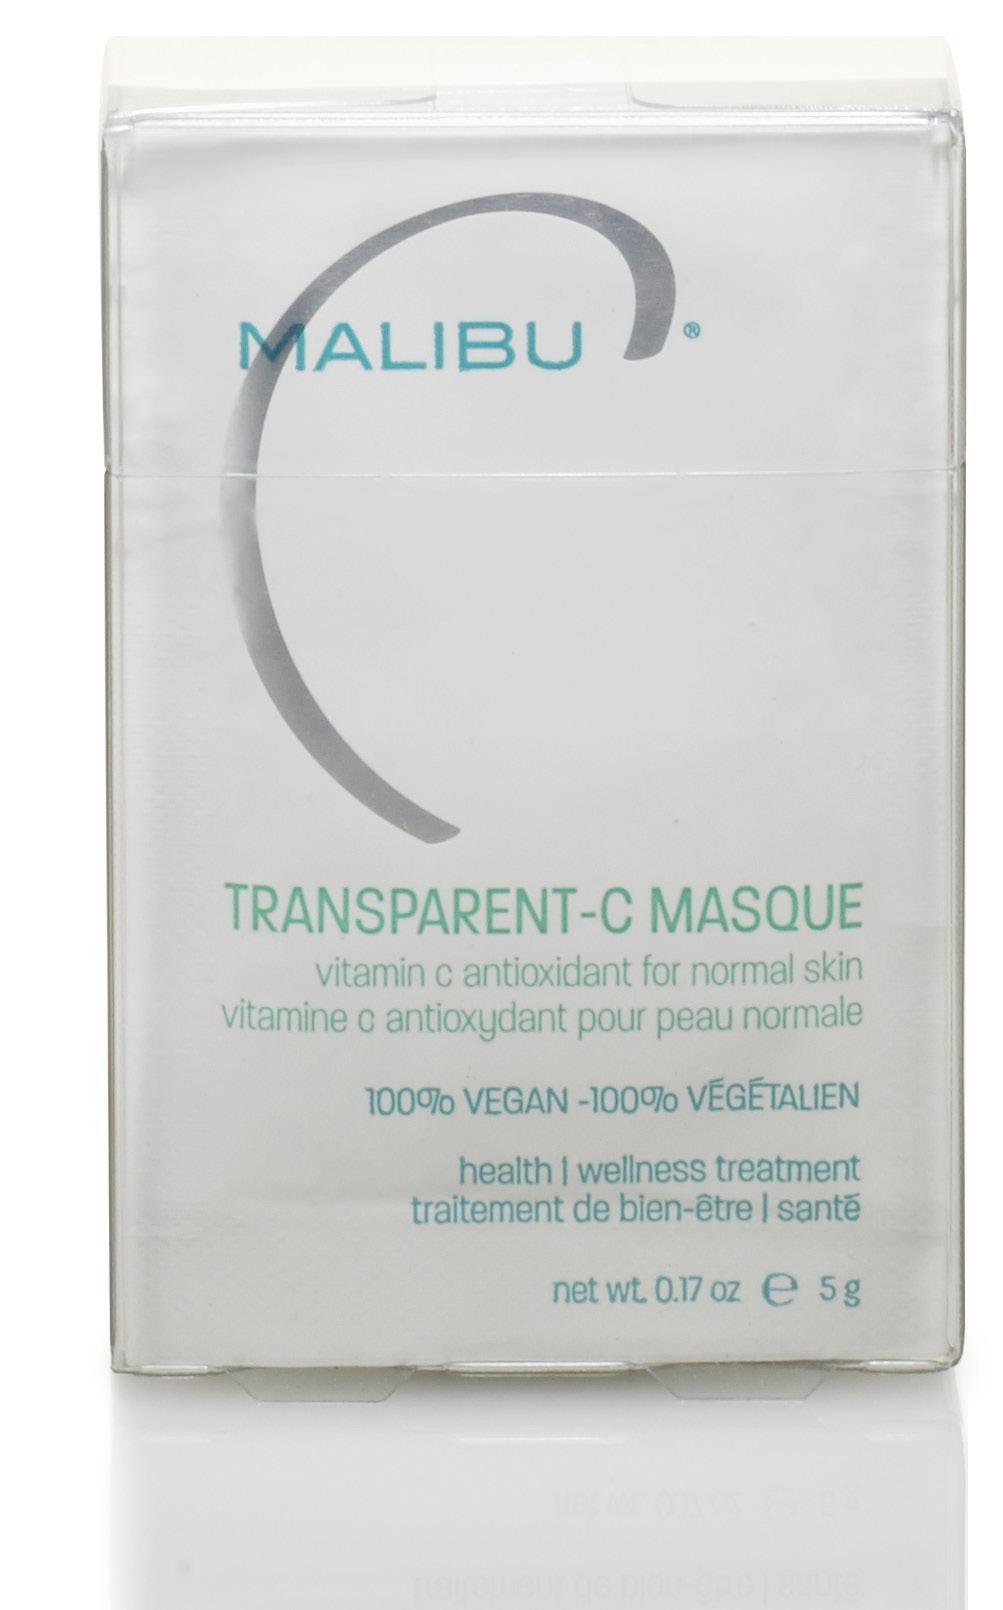 TRANSPARENT-C antioxidant masque for normal, dry and mature skin Powerful antioxidant wellness masque for normal, dry and mature skin Helps reverse and prevent the visible signs of aging and abnormal